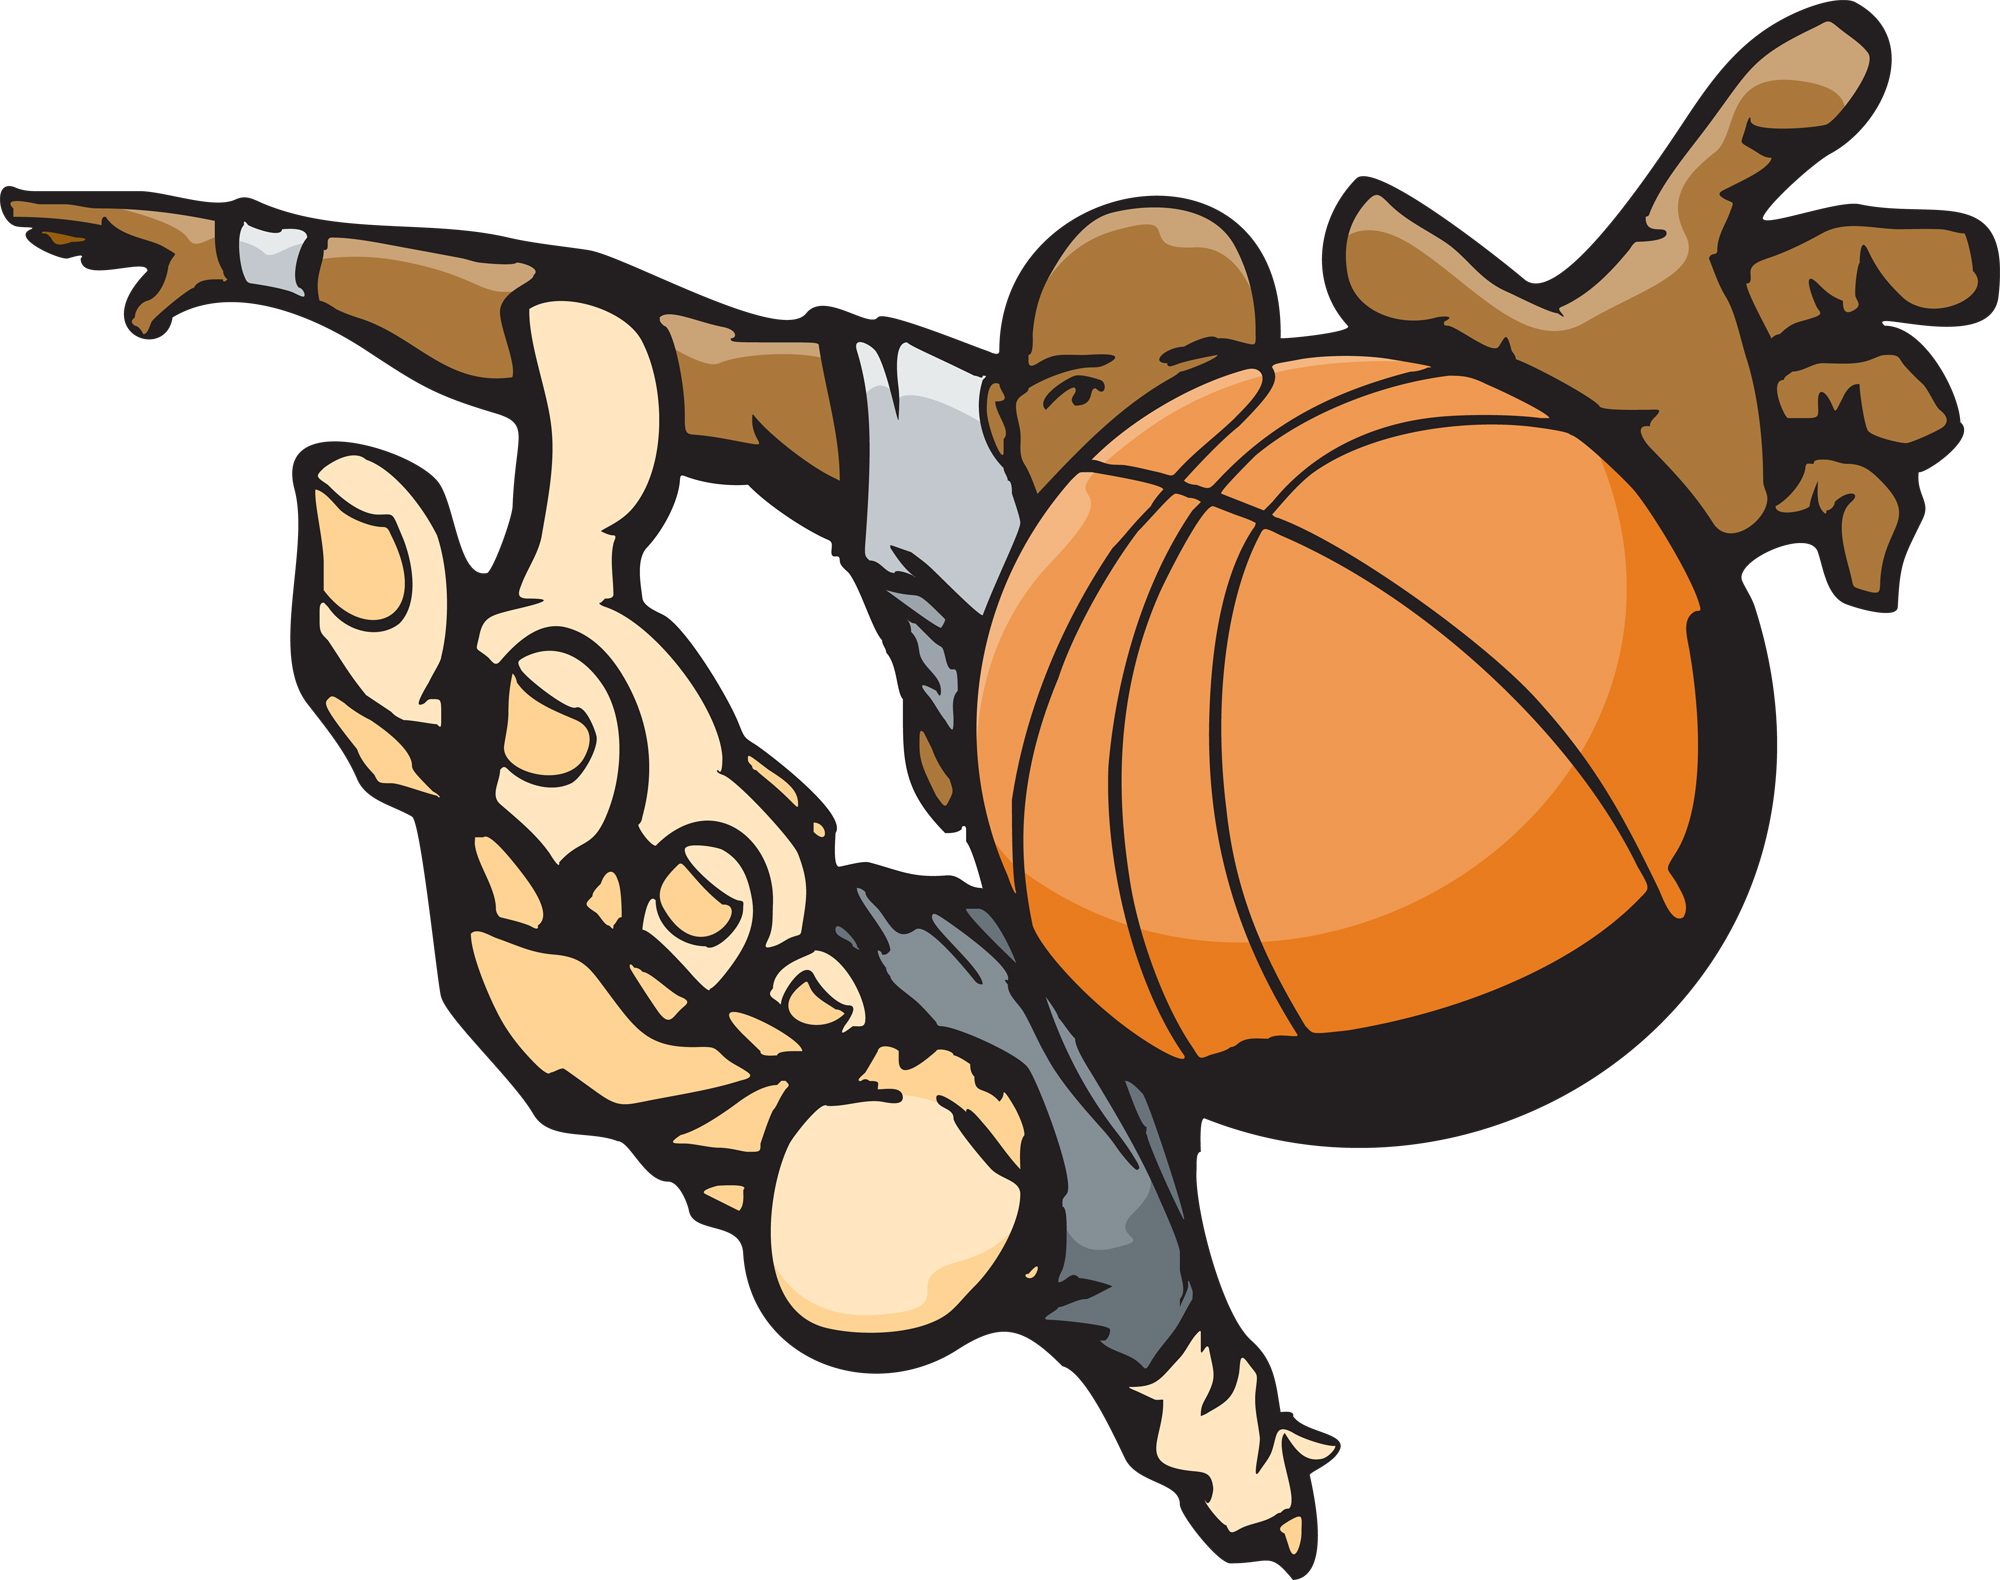 Basketball Coach Clipart - Adding Character and Personality to Your Team